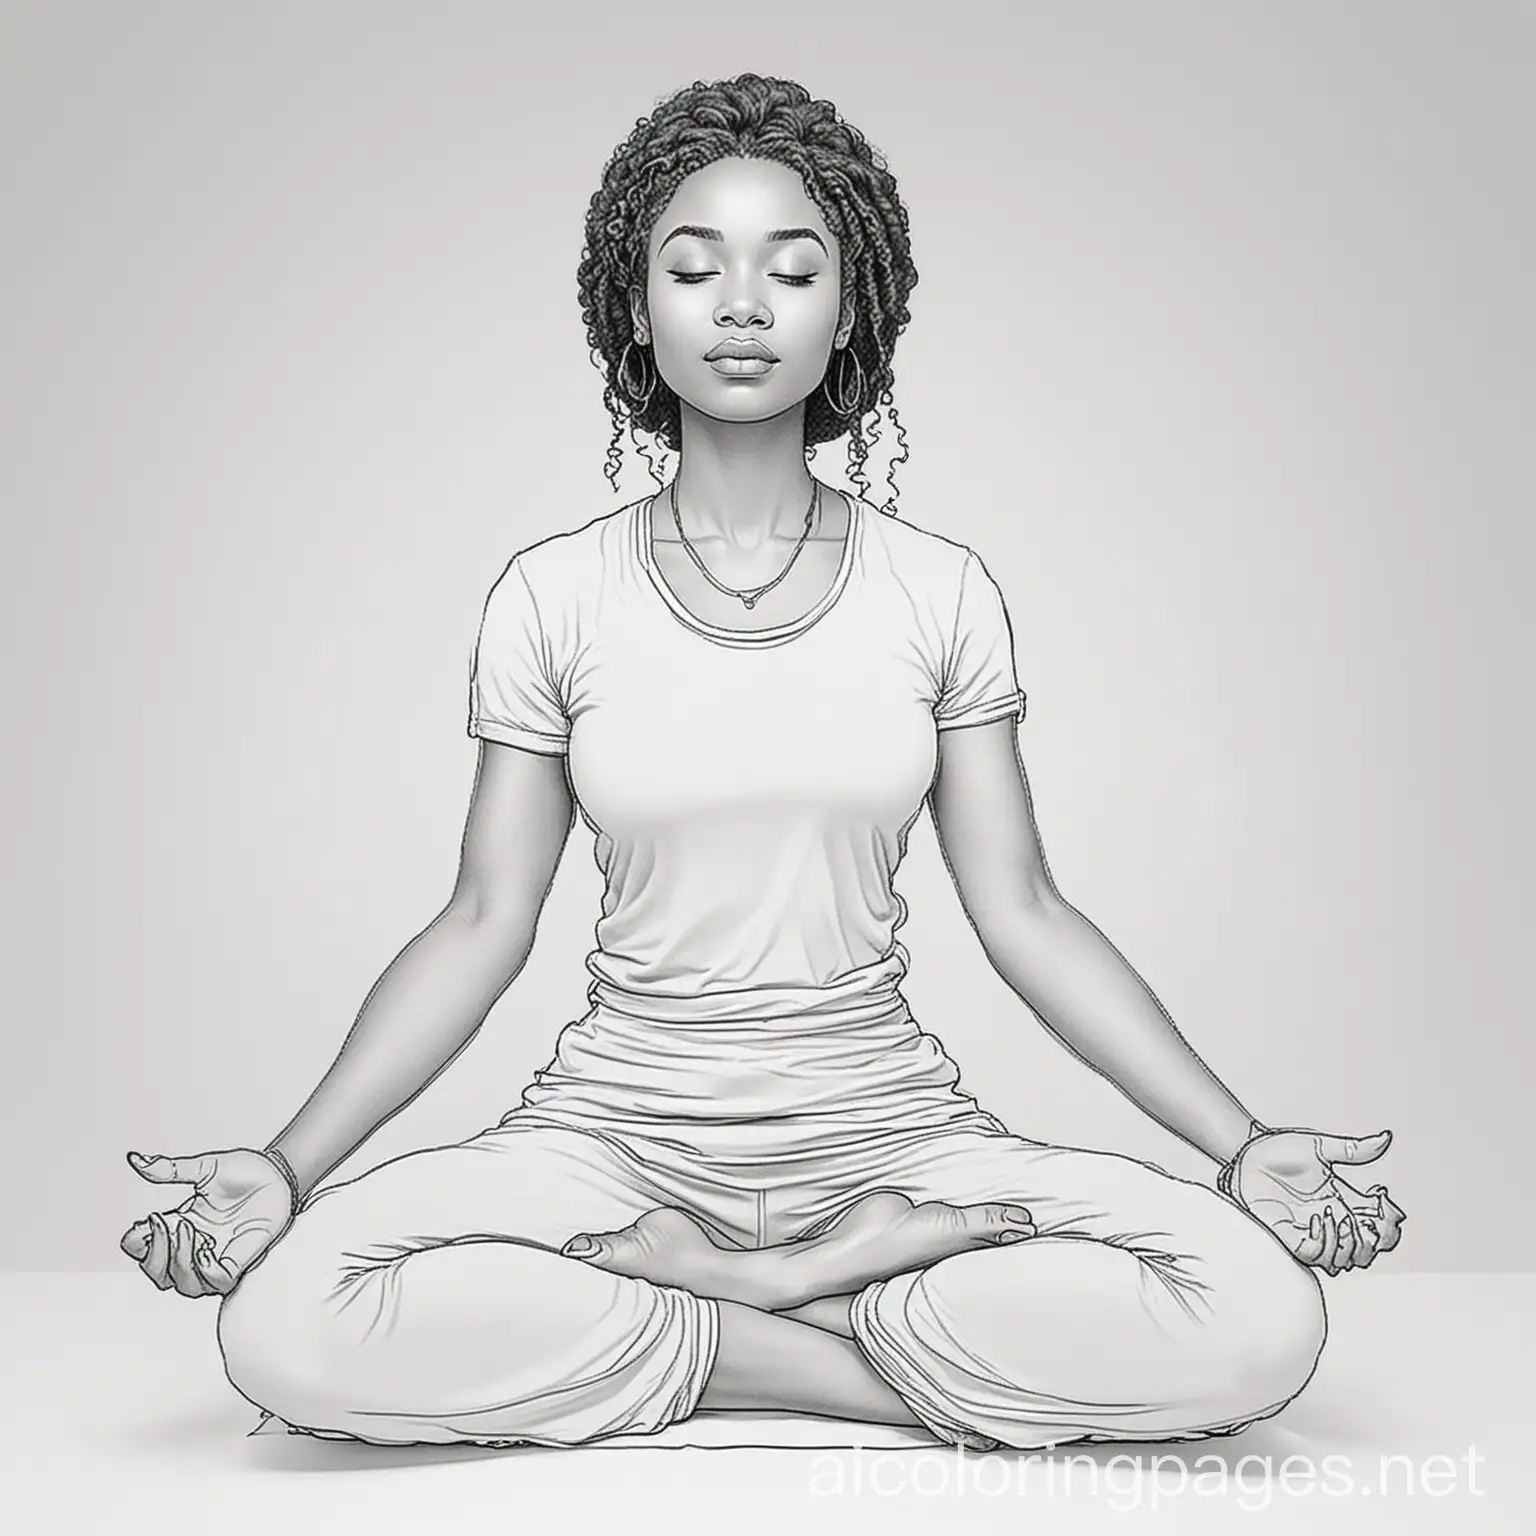 Black woman meditating, Coloring Page, black and white, line art, white background, Simplicity, Ample White Space. The background of the coloring page is plain white to make it easy for young children to color within the lines. The outlines of all the subjects are easy to distinguish, making it simple for kids to color without too much difficulty